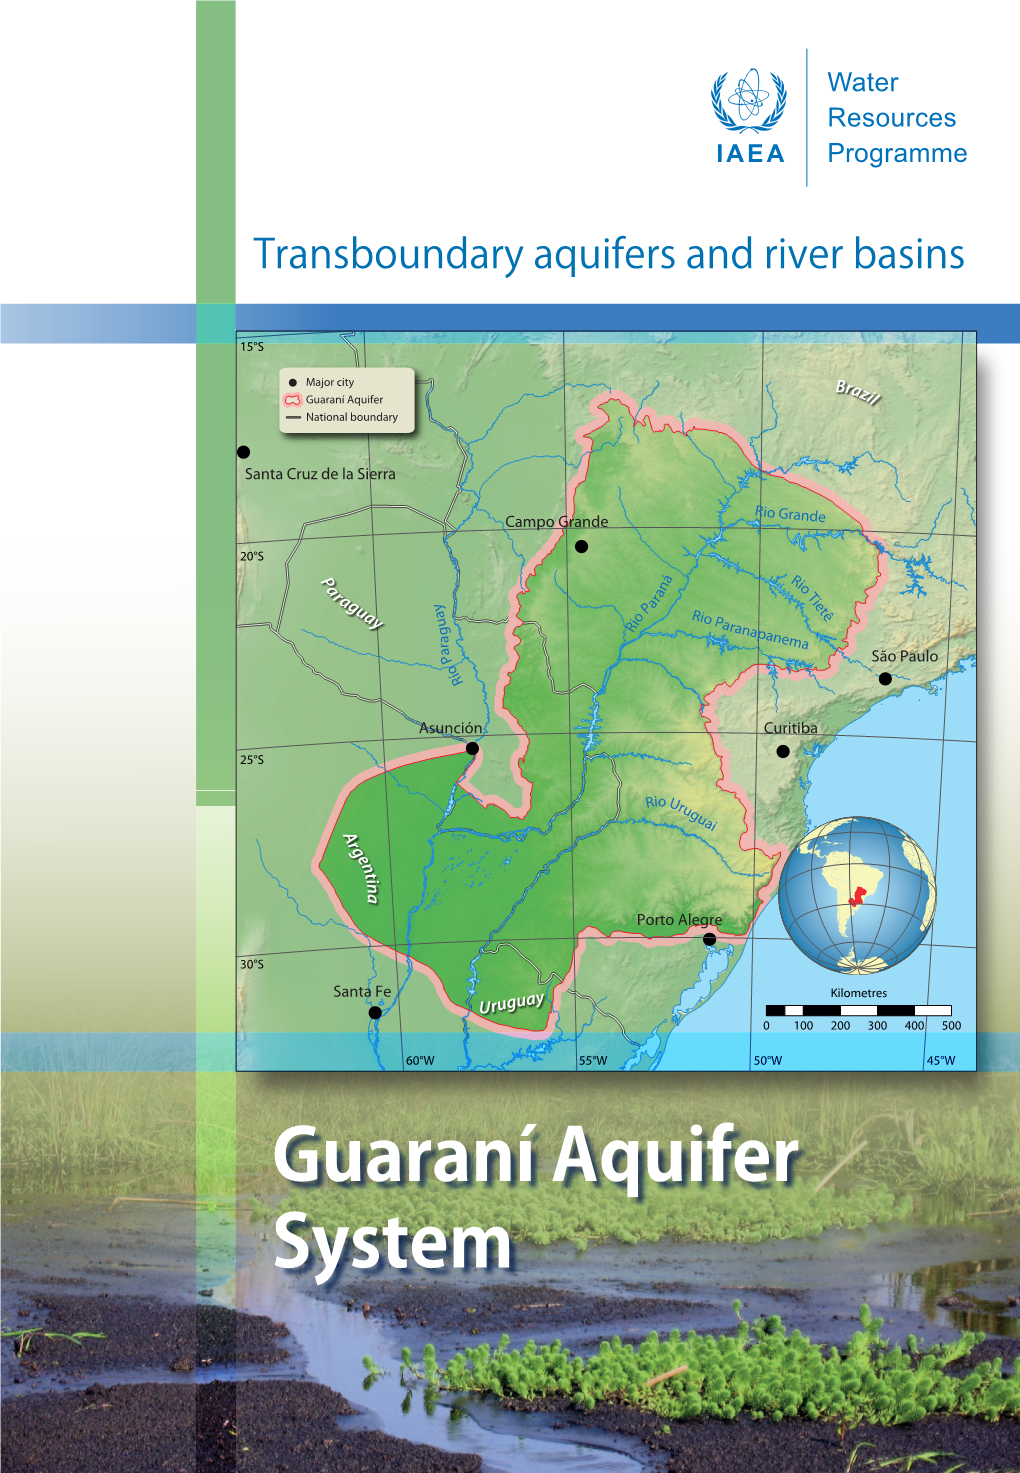 Guaraní Aquifer System New Light Shed on One of the World’S Largest Aquifers